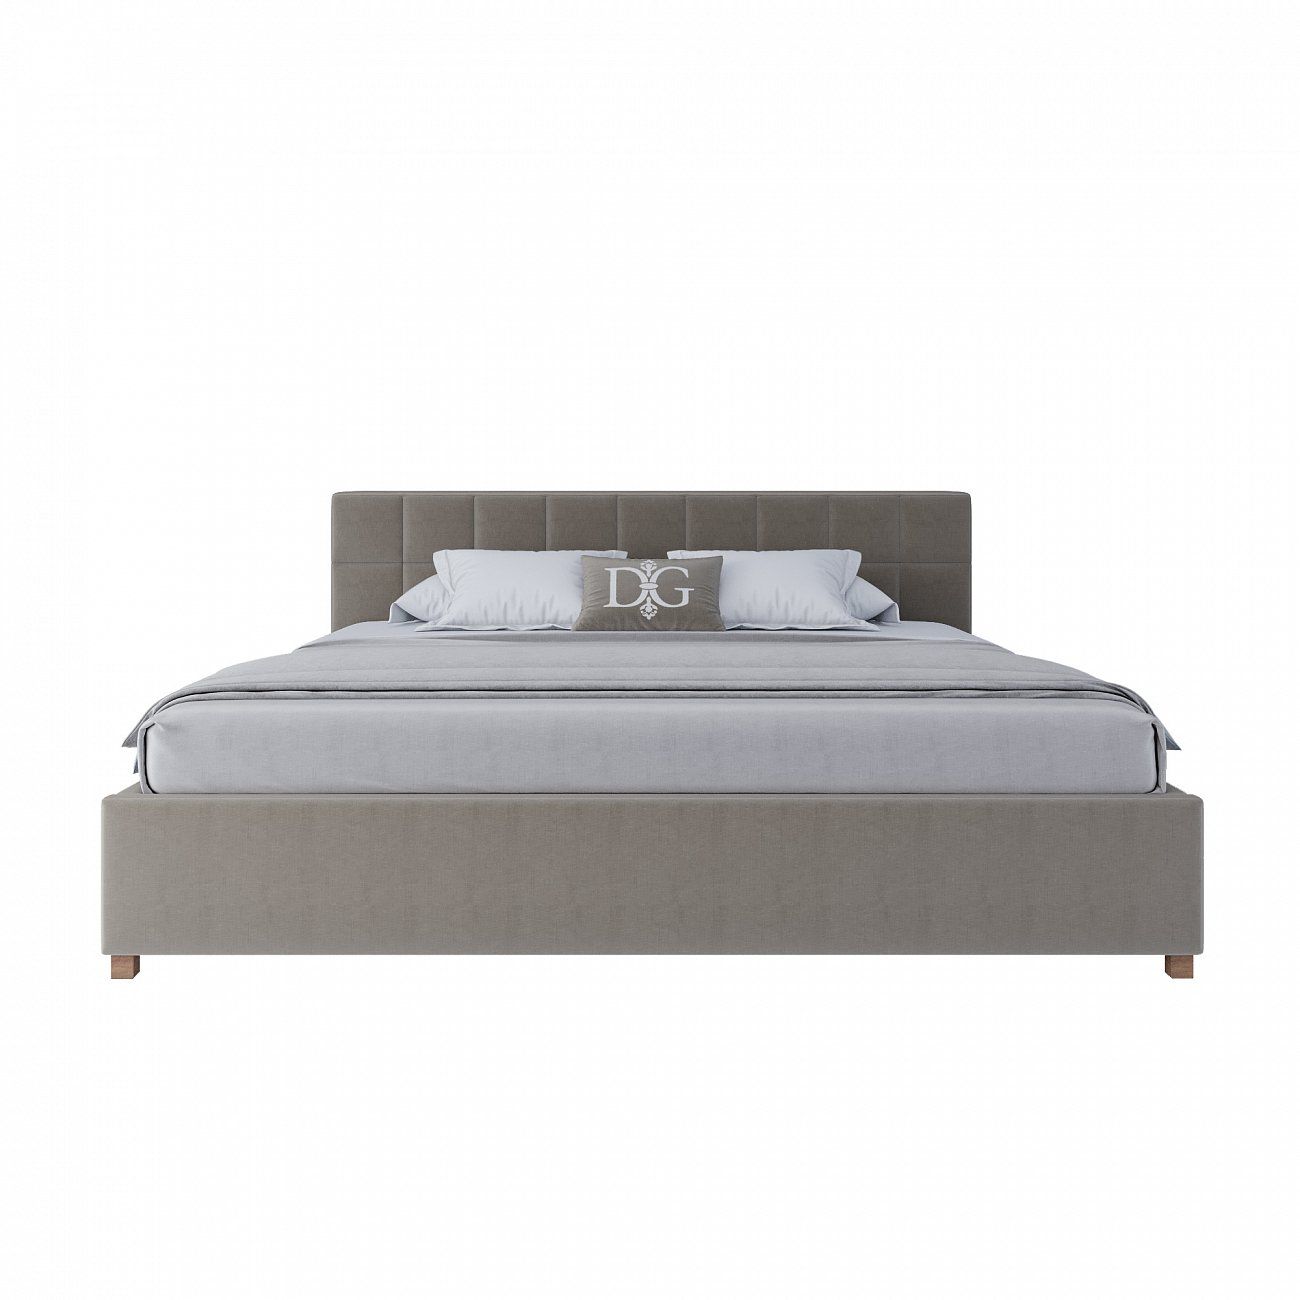 The bed is large 200x200 Wales grey